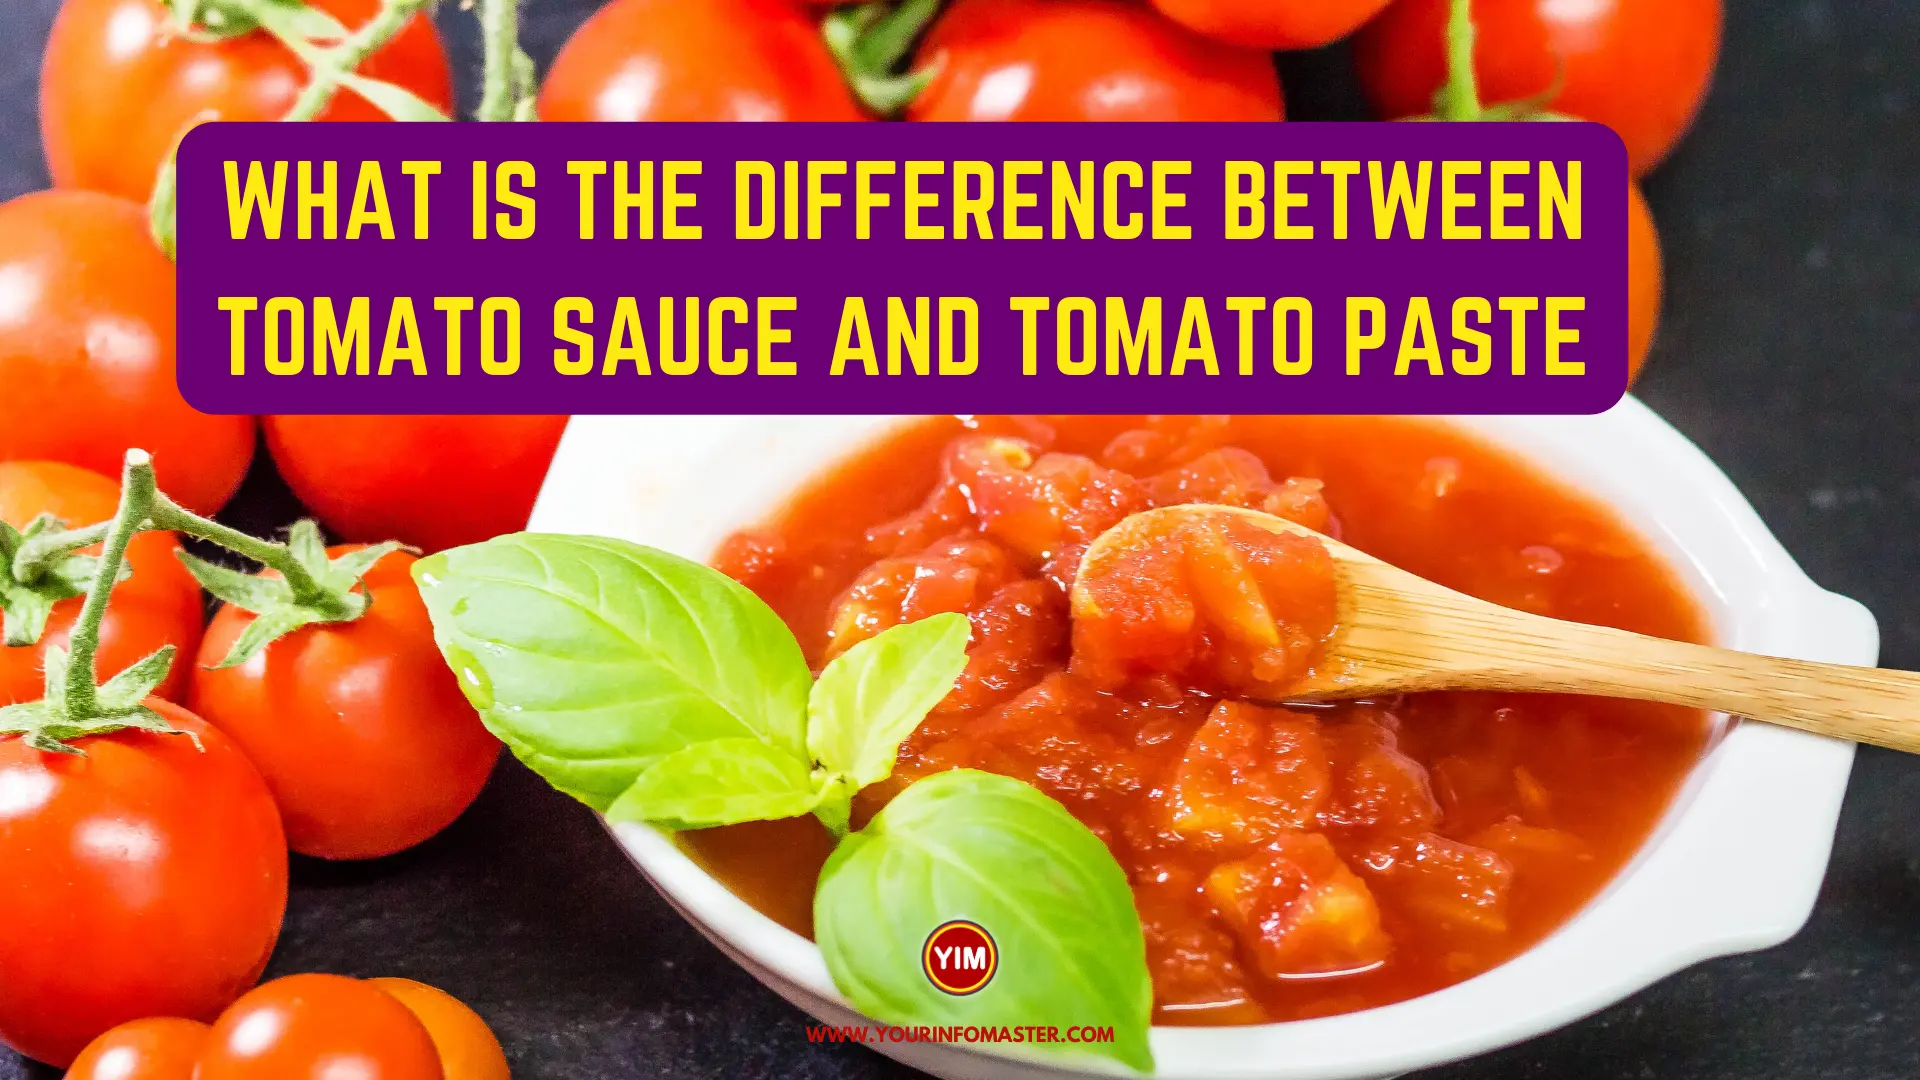 What is the Difference Between Tomato Sauce and Tomato Paste